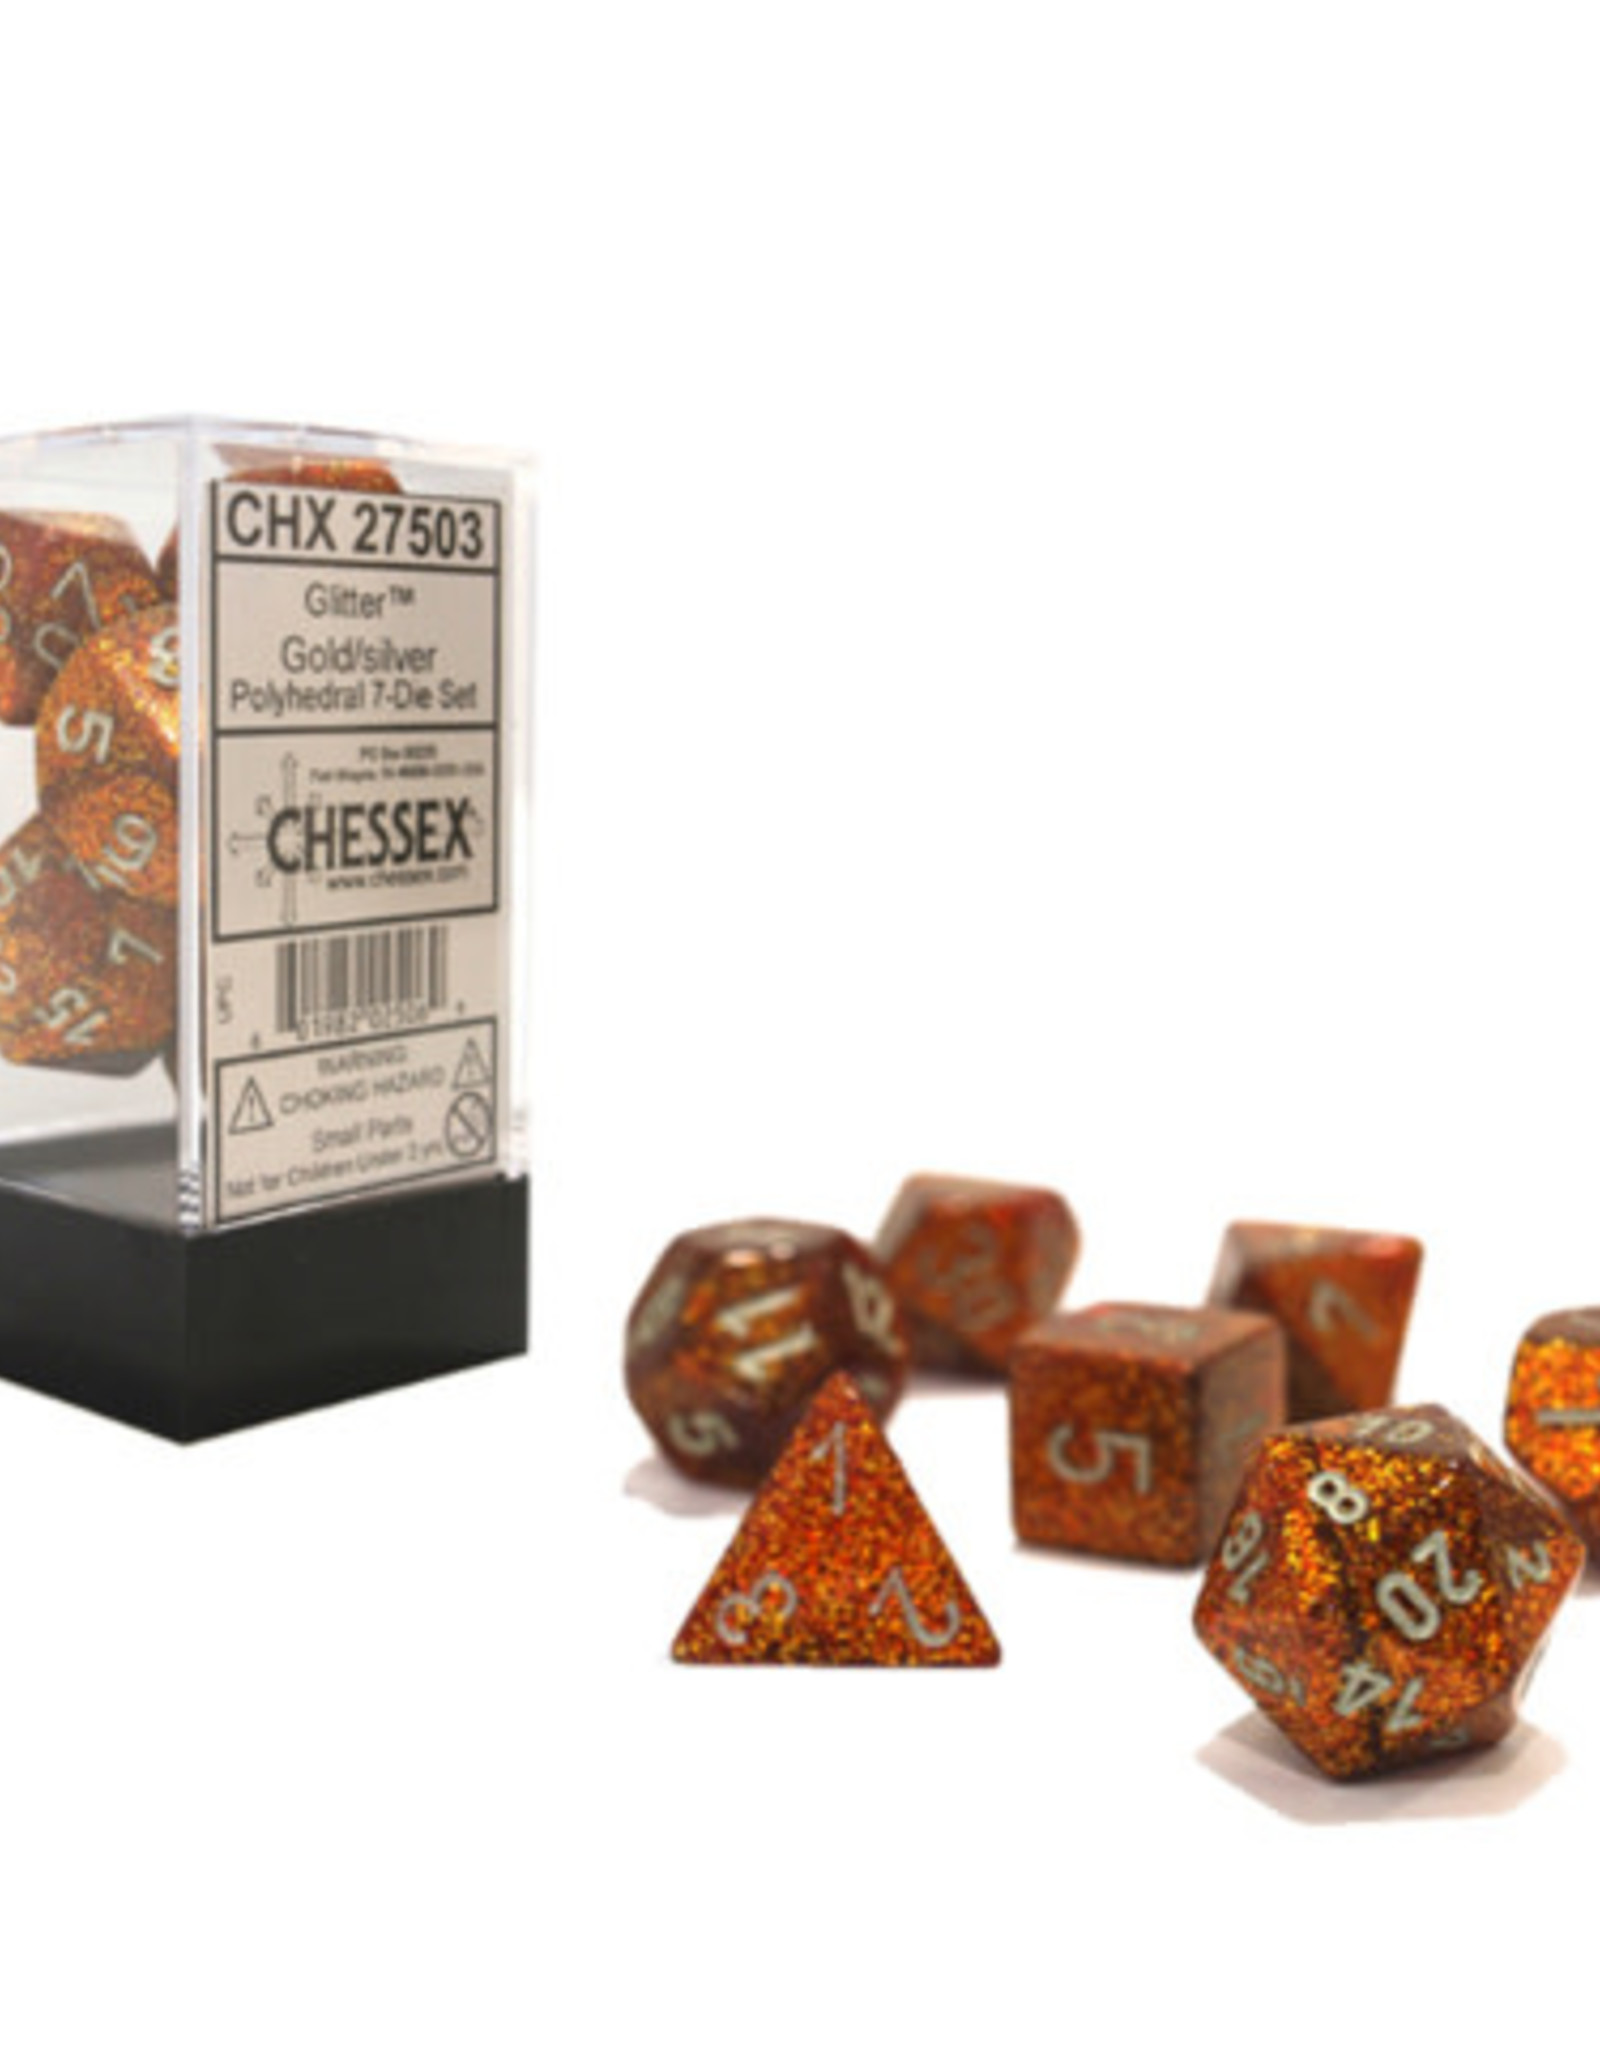 Chessex CHX Glitter Dice: Gold/Silver Poly 7-Die Set 27503